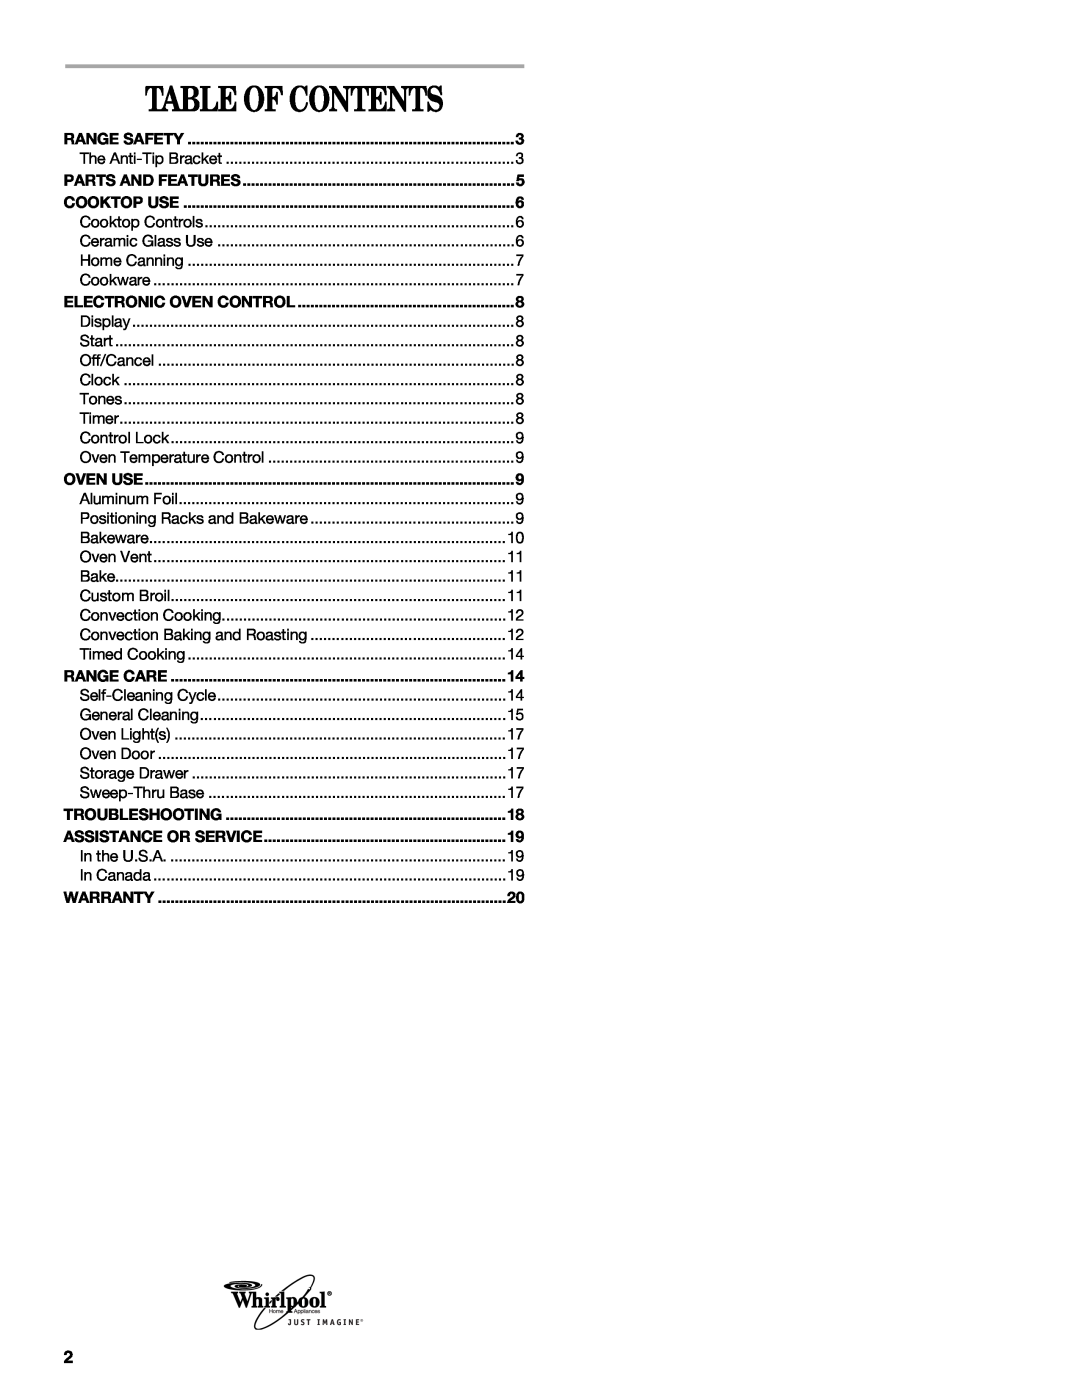 Whirlpool Ranges manual Table Of Contents 